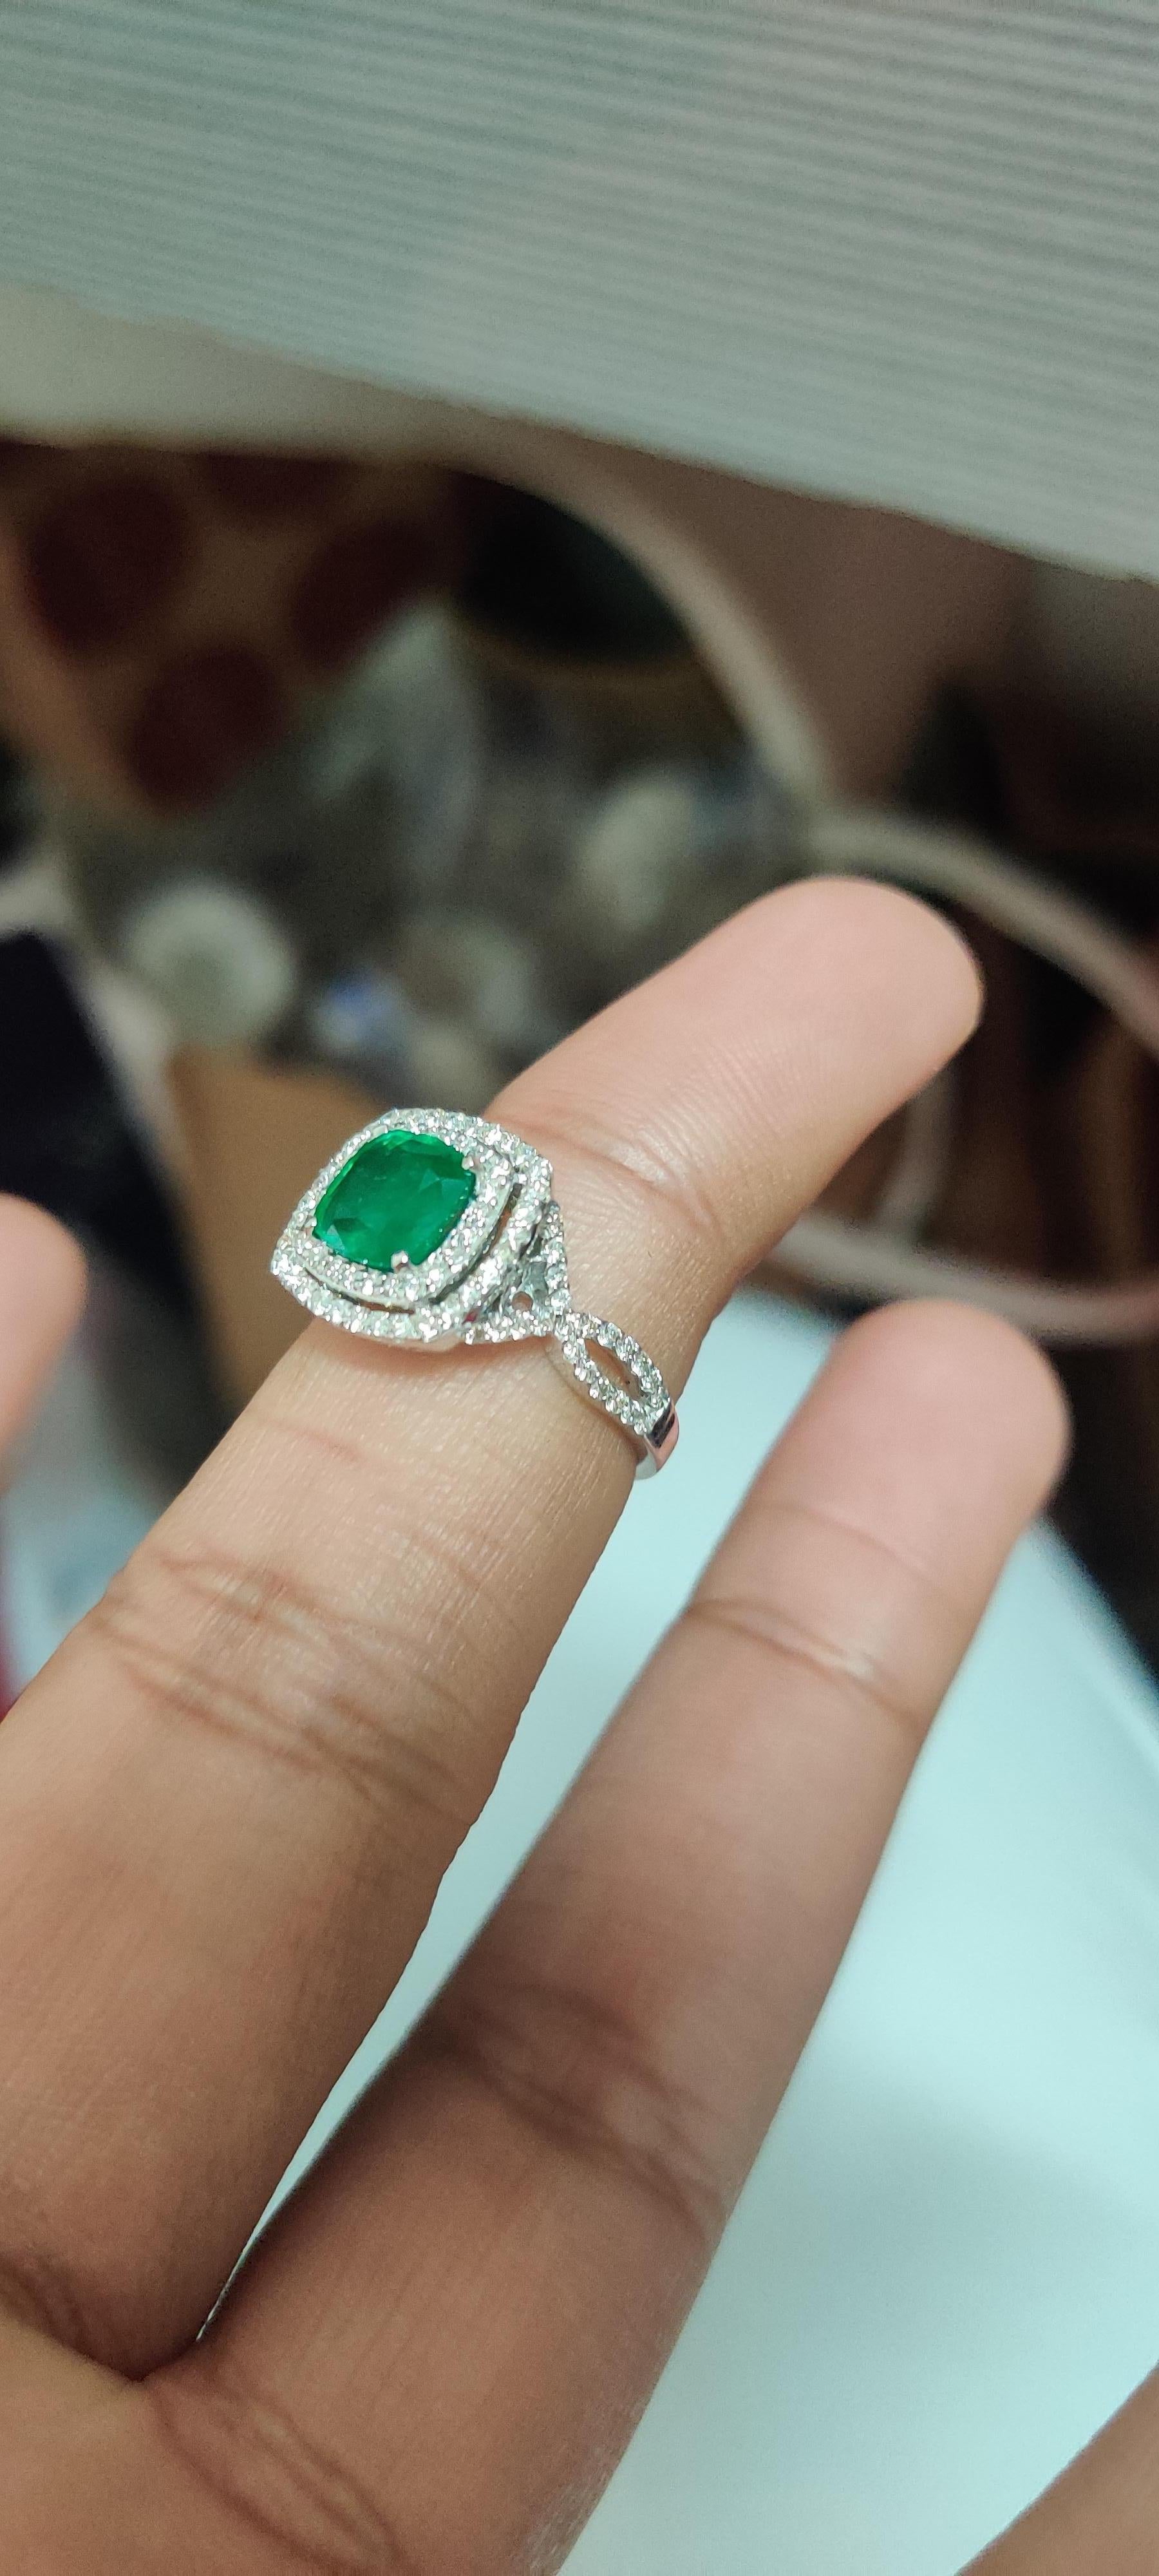 1.26 Carat Emerald with Halo Diamonds 18K White Gold Ring For Sale 2